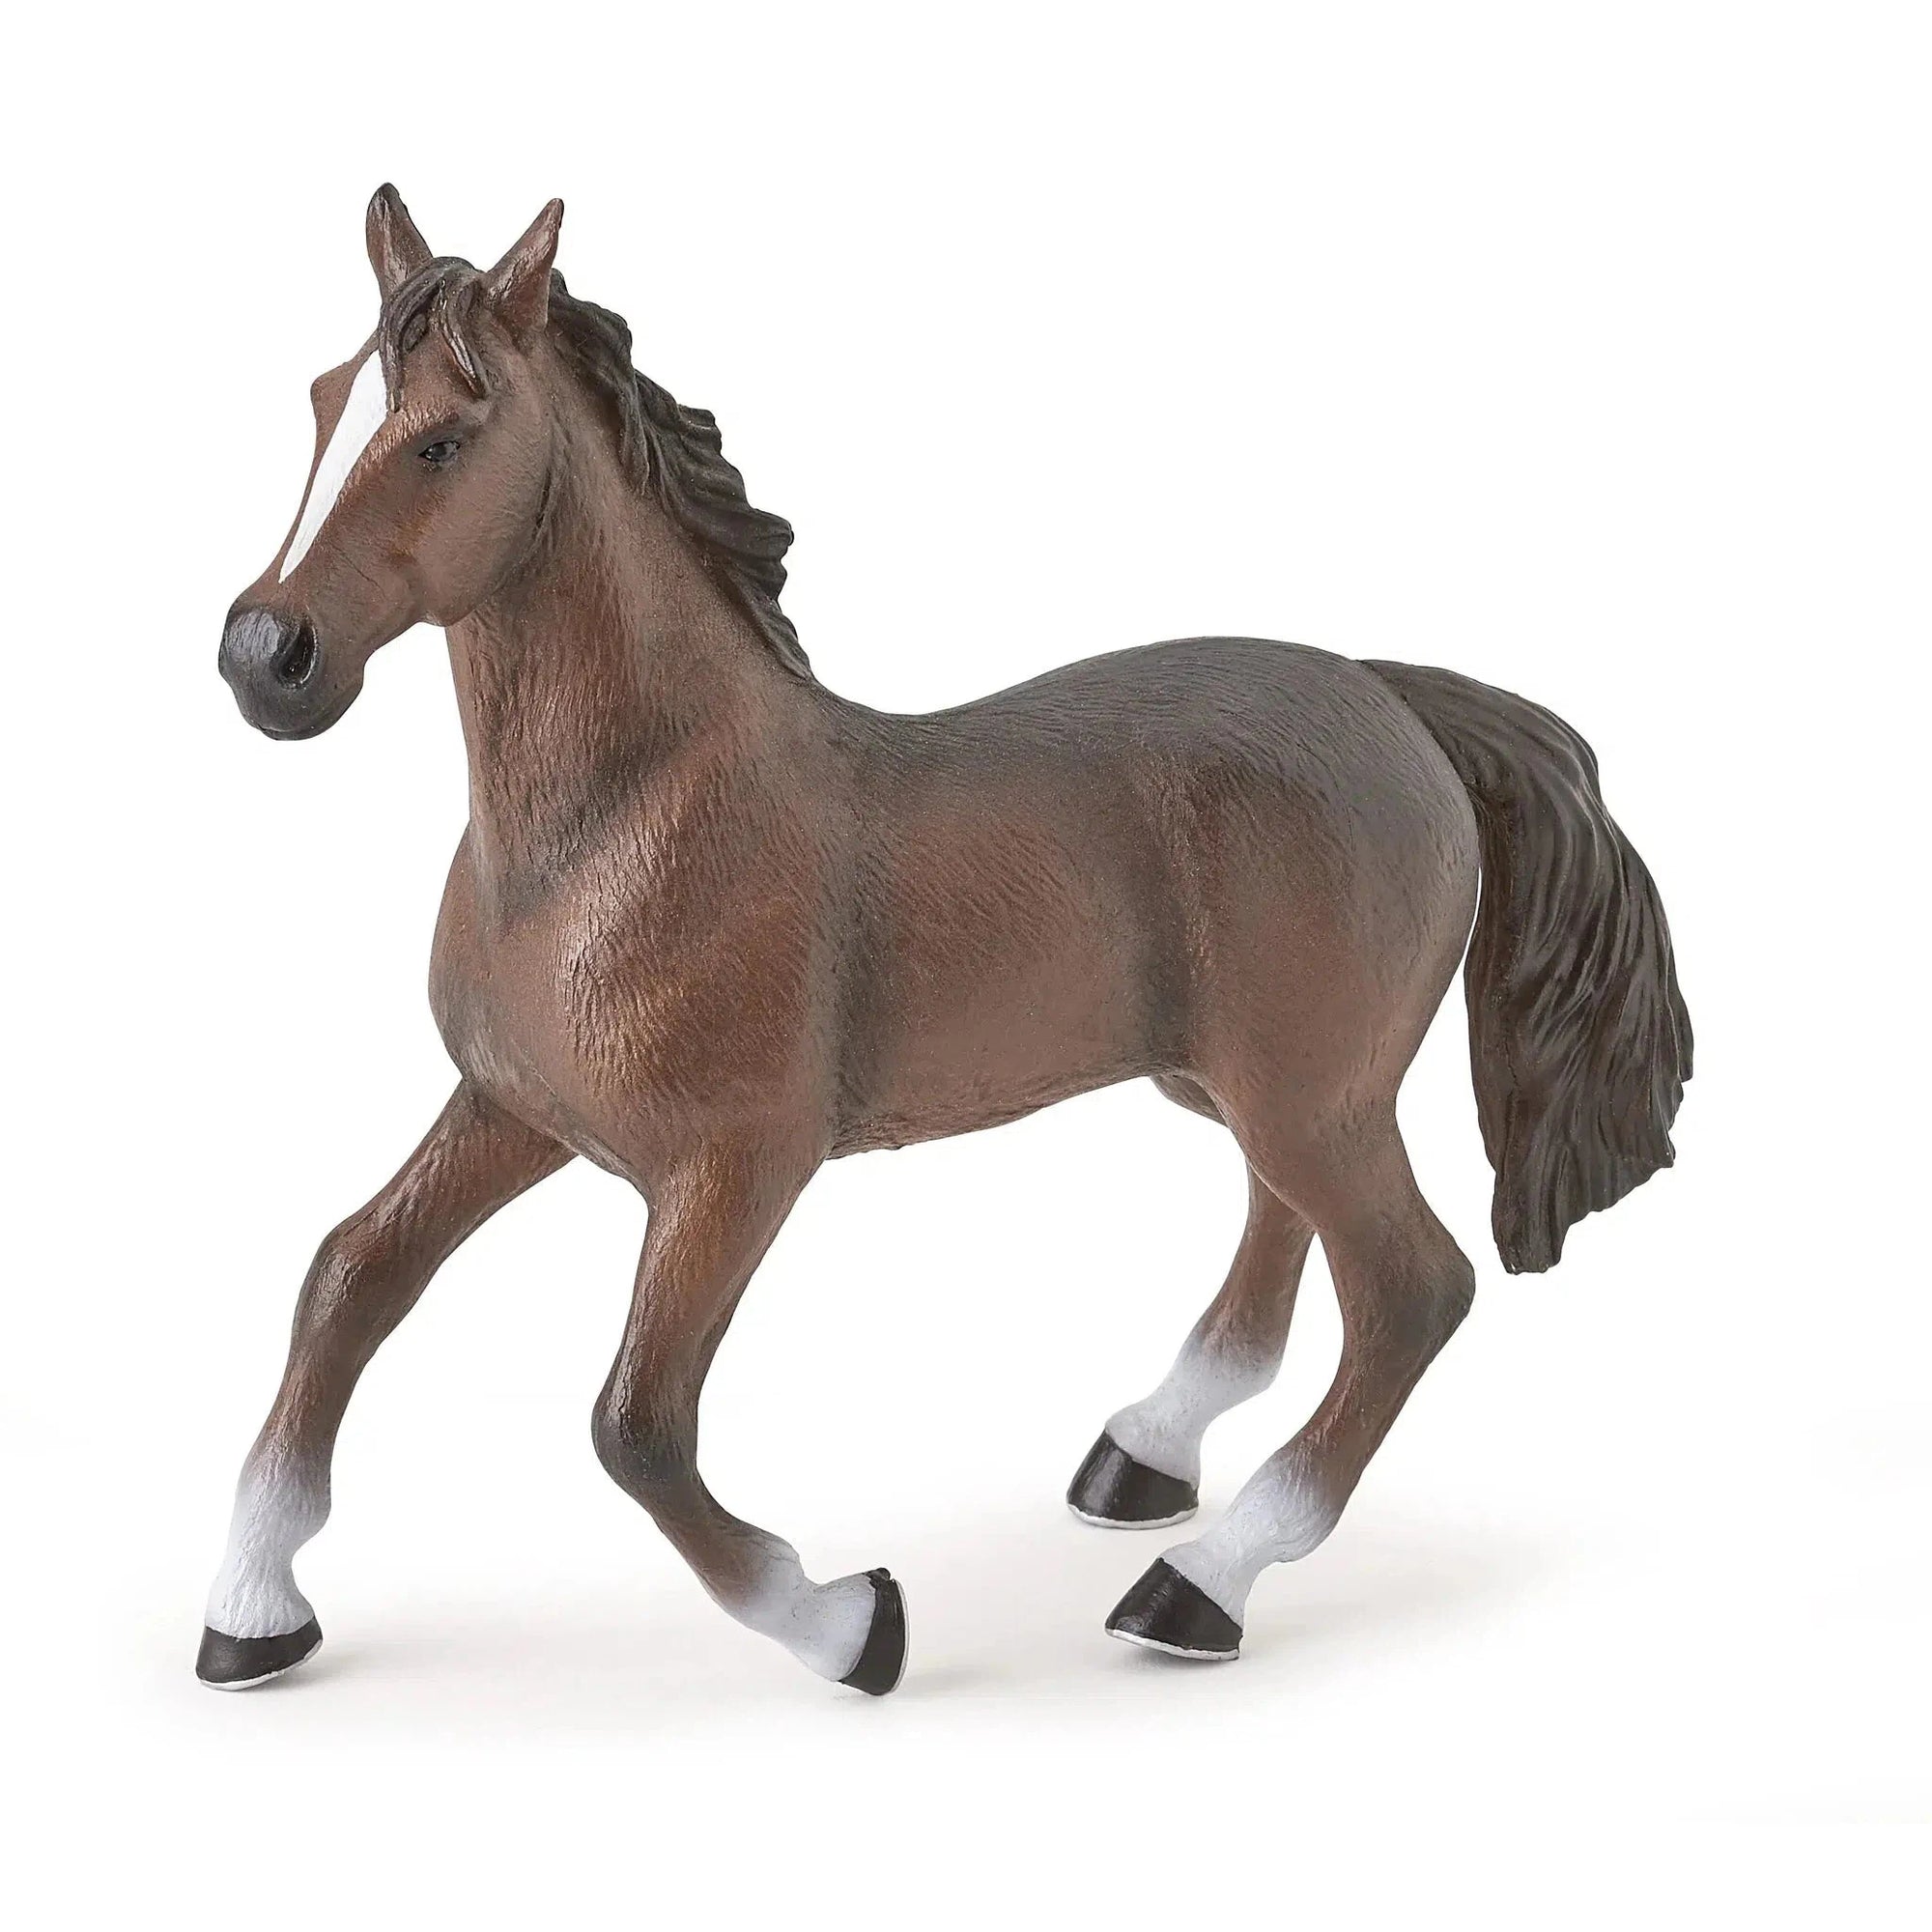 Front view of the Large Horse Figurine against a white background.